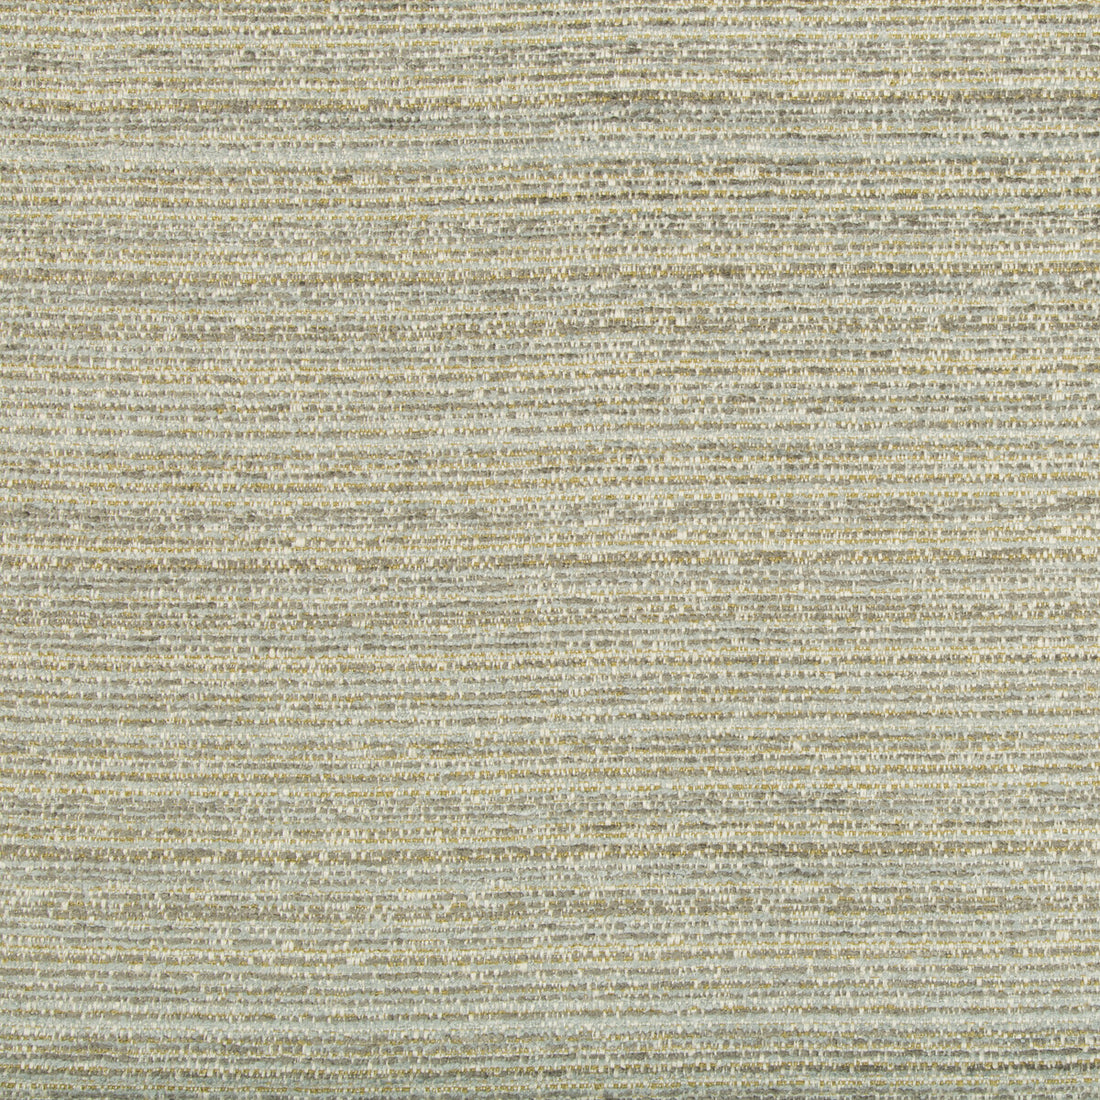 Kravet Contract fabric in 35048-1523 color - pattern 35048.1523.0 - by Kravet Contract in the Incase Crypton Gis collection